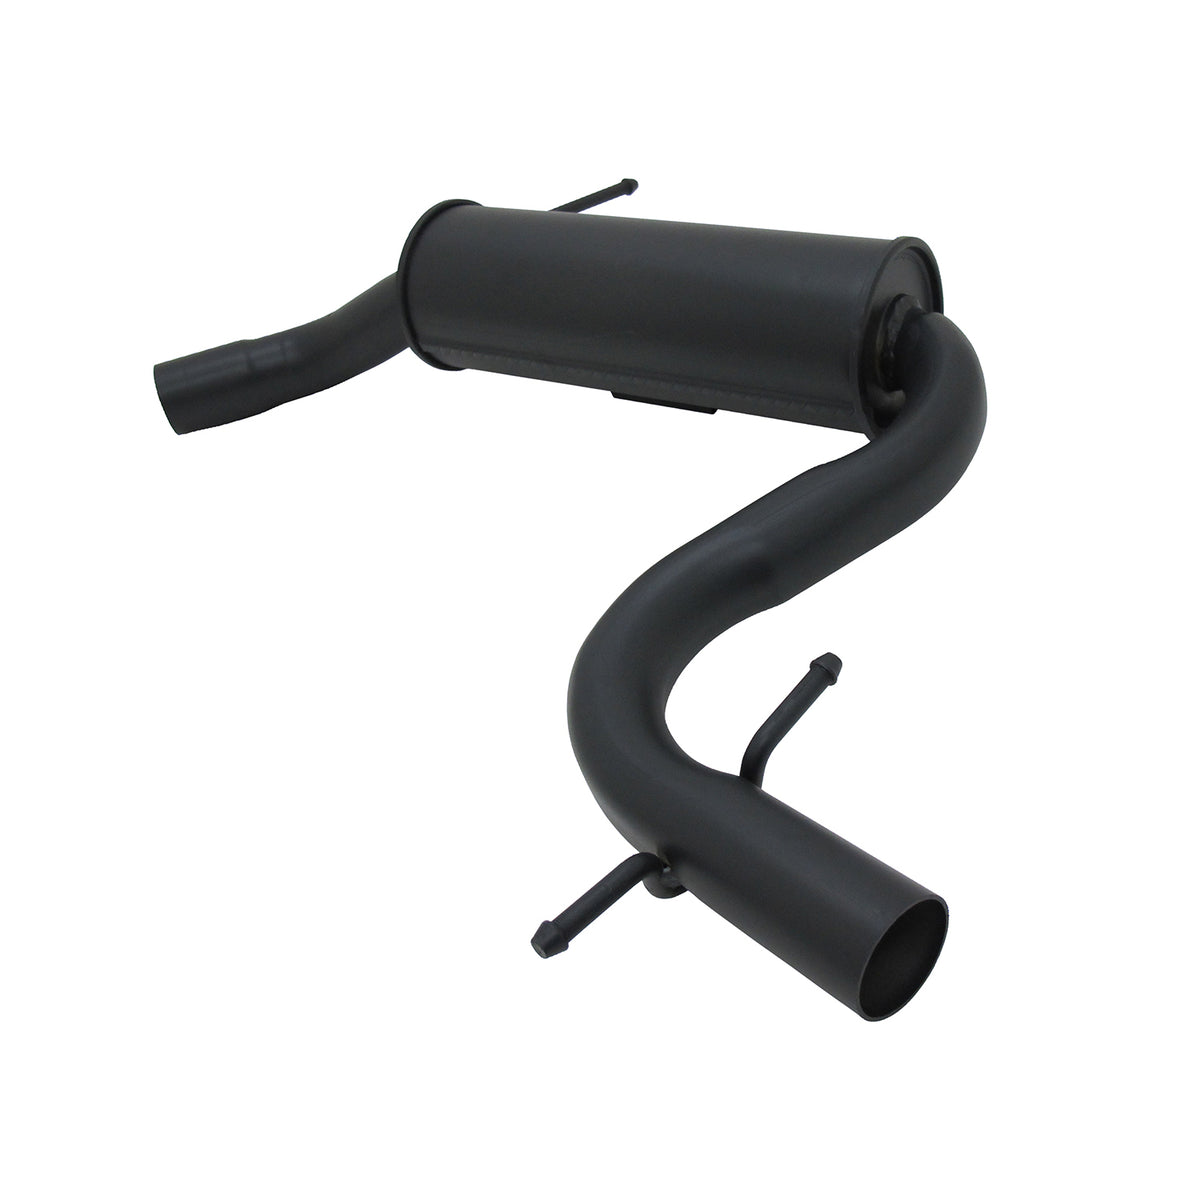 NOVUS Sport front silencer for A3 Leon Golf 5 6 Beetle Scirocco with EC